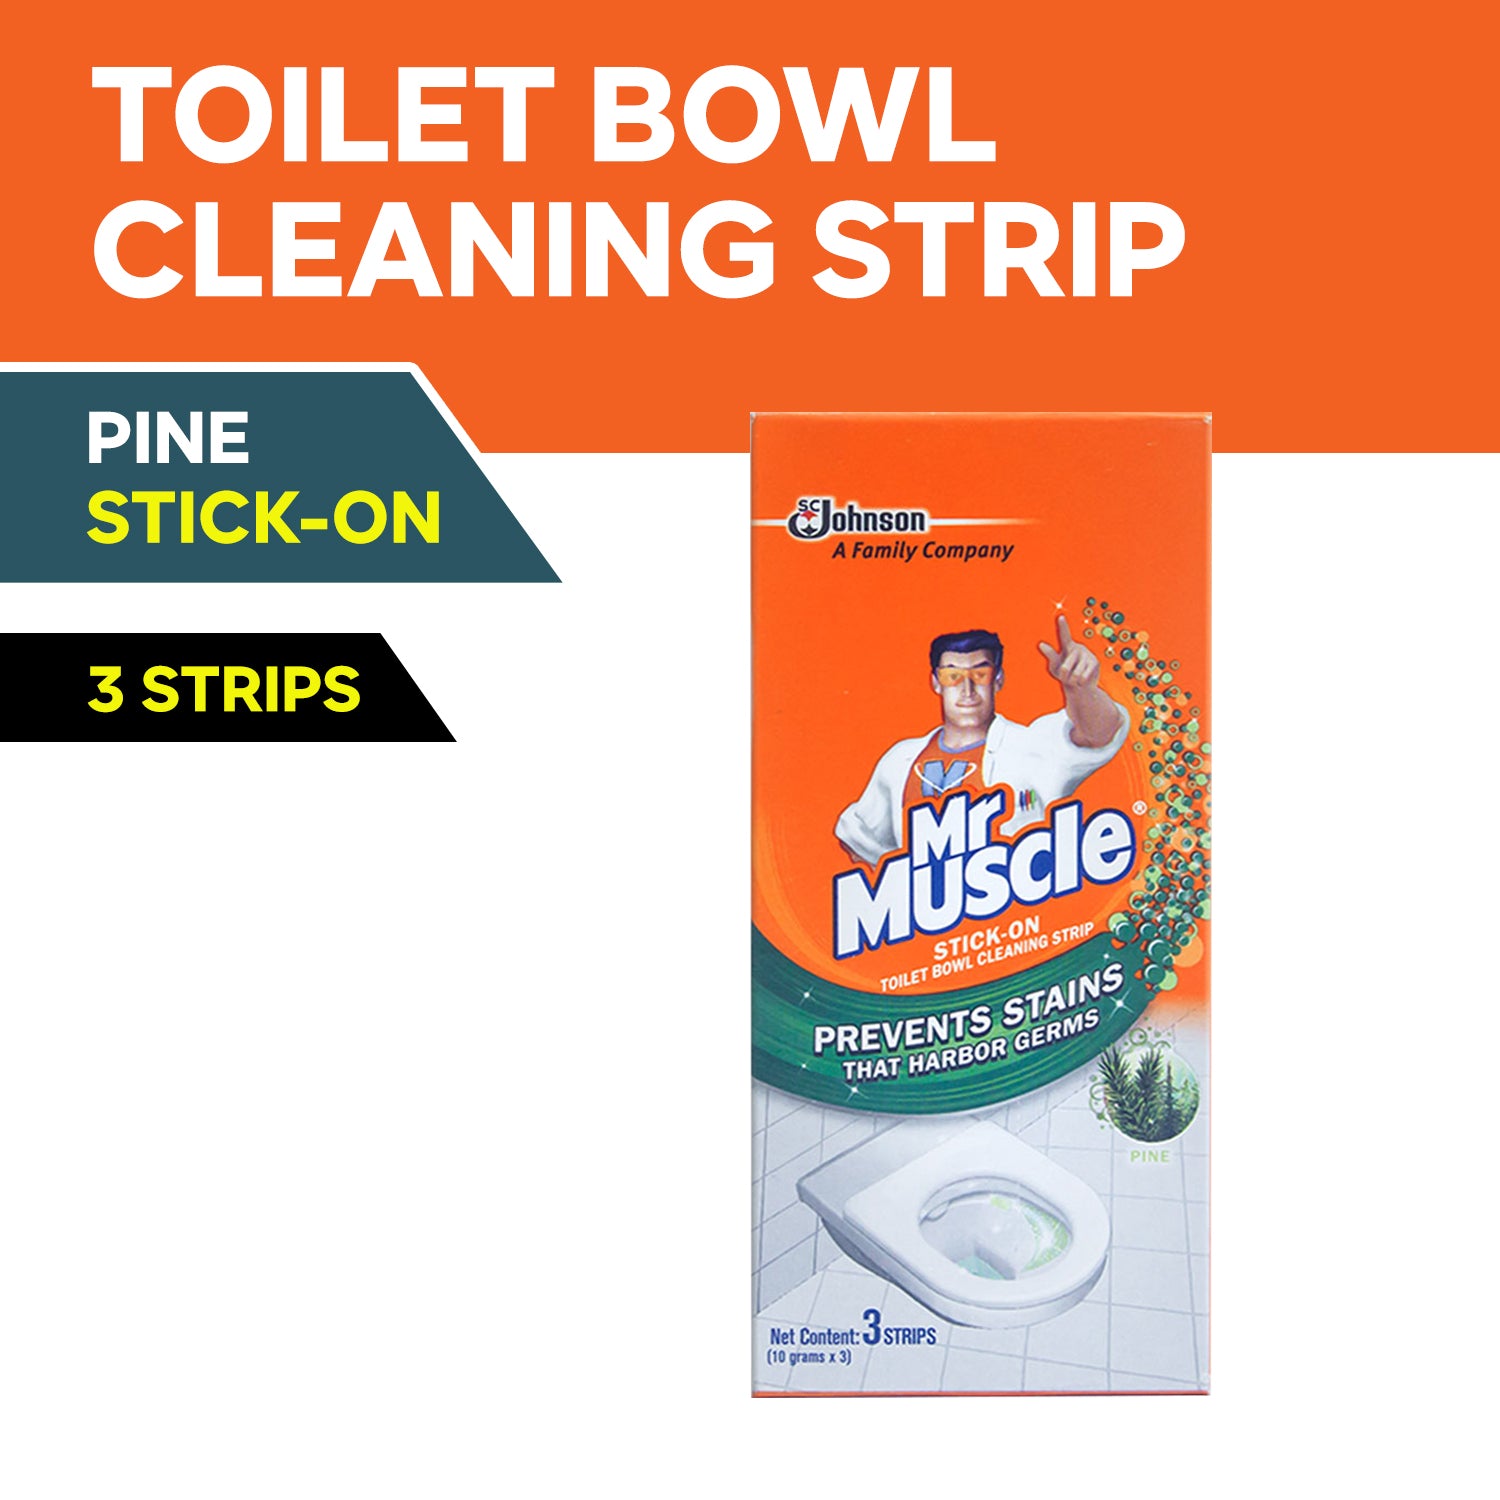 Mr. Muscle Stick-On Toilet Bowl Cleaning Strip 3s Pine